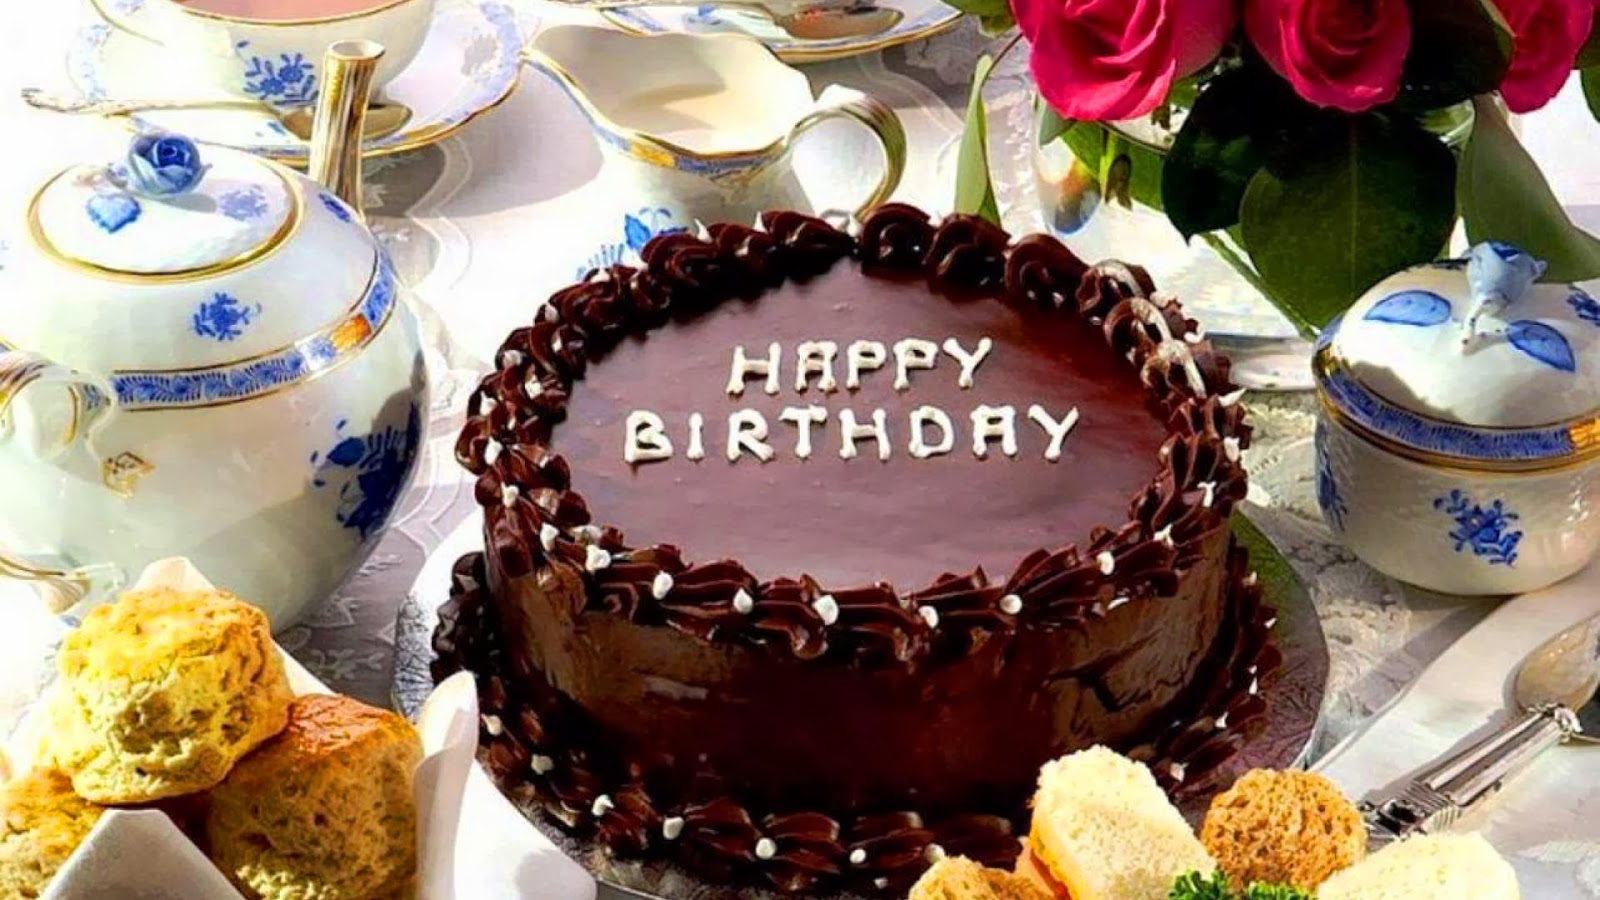 Birthday Cake Images Download - Happy Birthday Hd Cakes - 1600x900 Wallpaper  